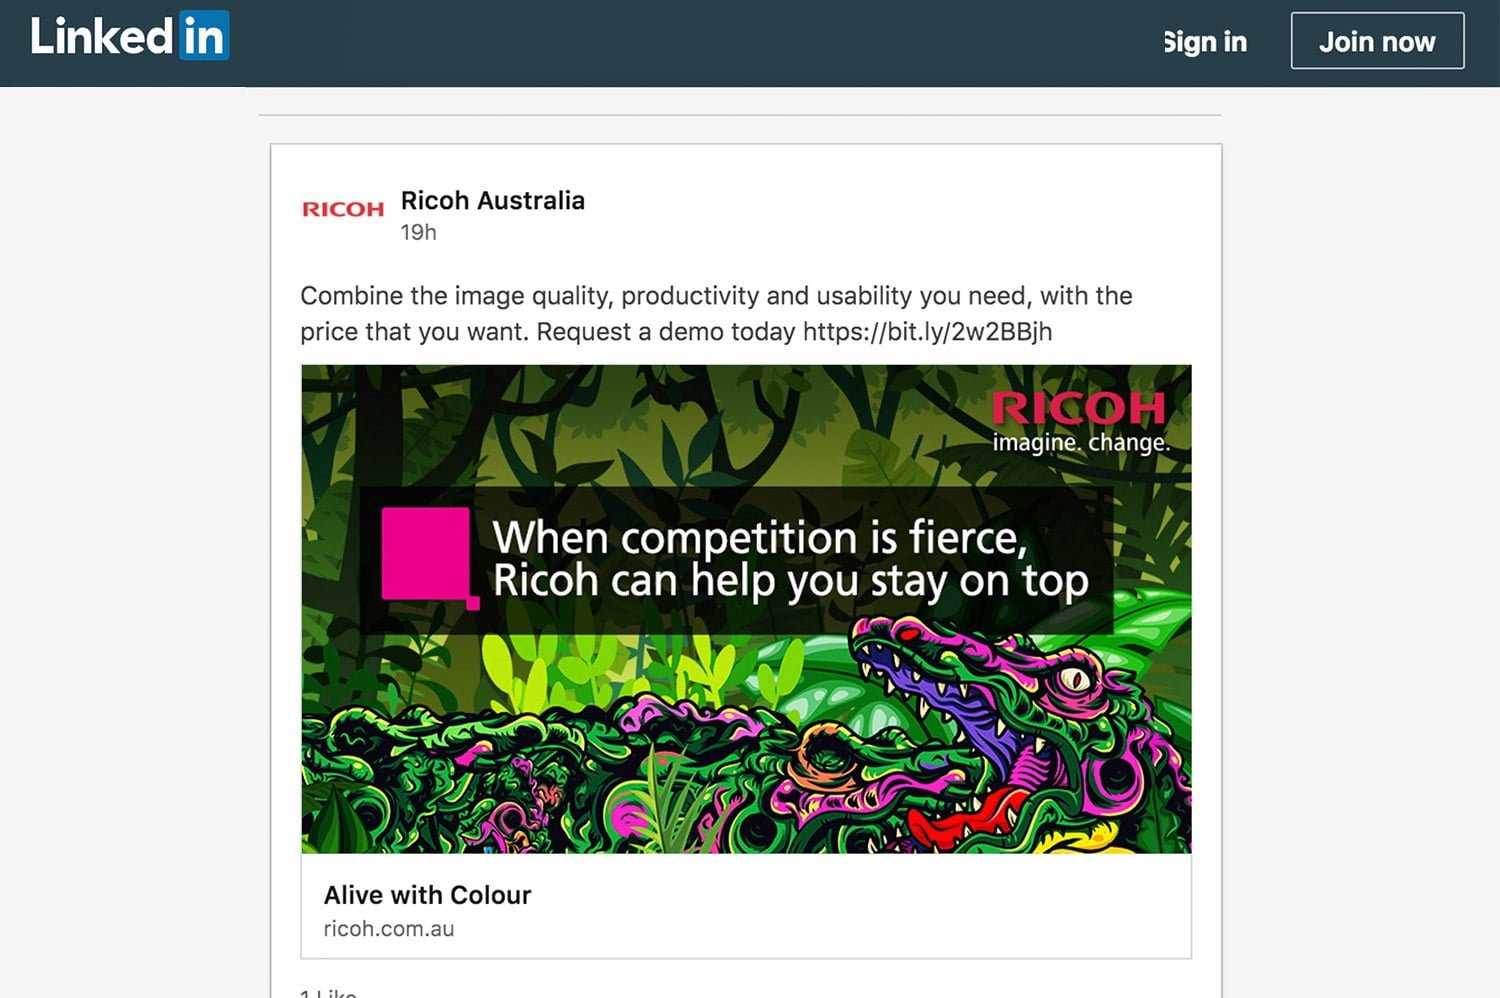 "Colorful abstract graphic showcasing vibrant hues of red, blue, green, and yellow blending together in dynamic patterns. The image features the text 'Alive with Colour' prominently in the center, with the Ricoh logo displayed below. This visually engaging design emphasizes energy, creativity, and innovation, reflecting Ricoh's commitment to dynamic and colorful printing solutions. The background includes a spectrum of colors that seamlessly merge, creating a lively, eye-catching effect likely intended for a LinkedIn promotional post."